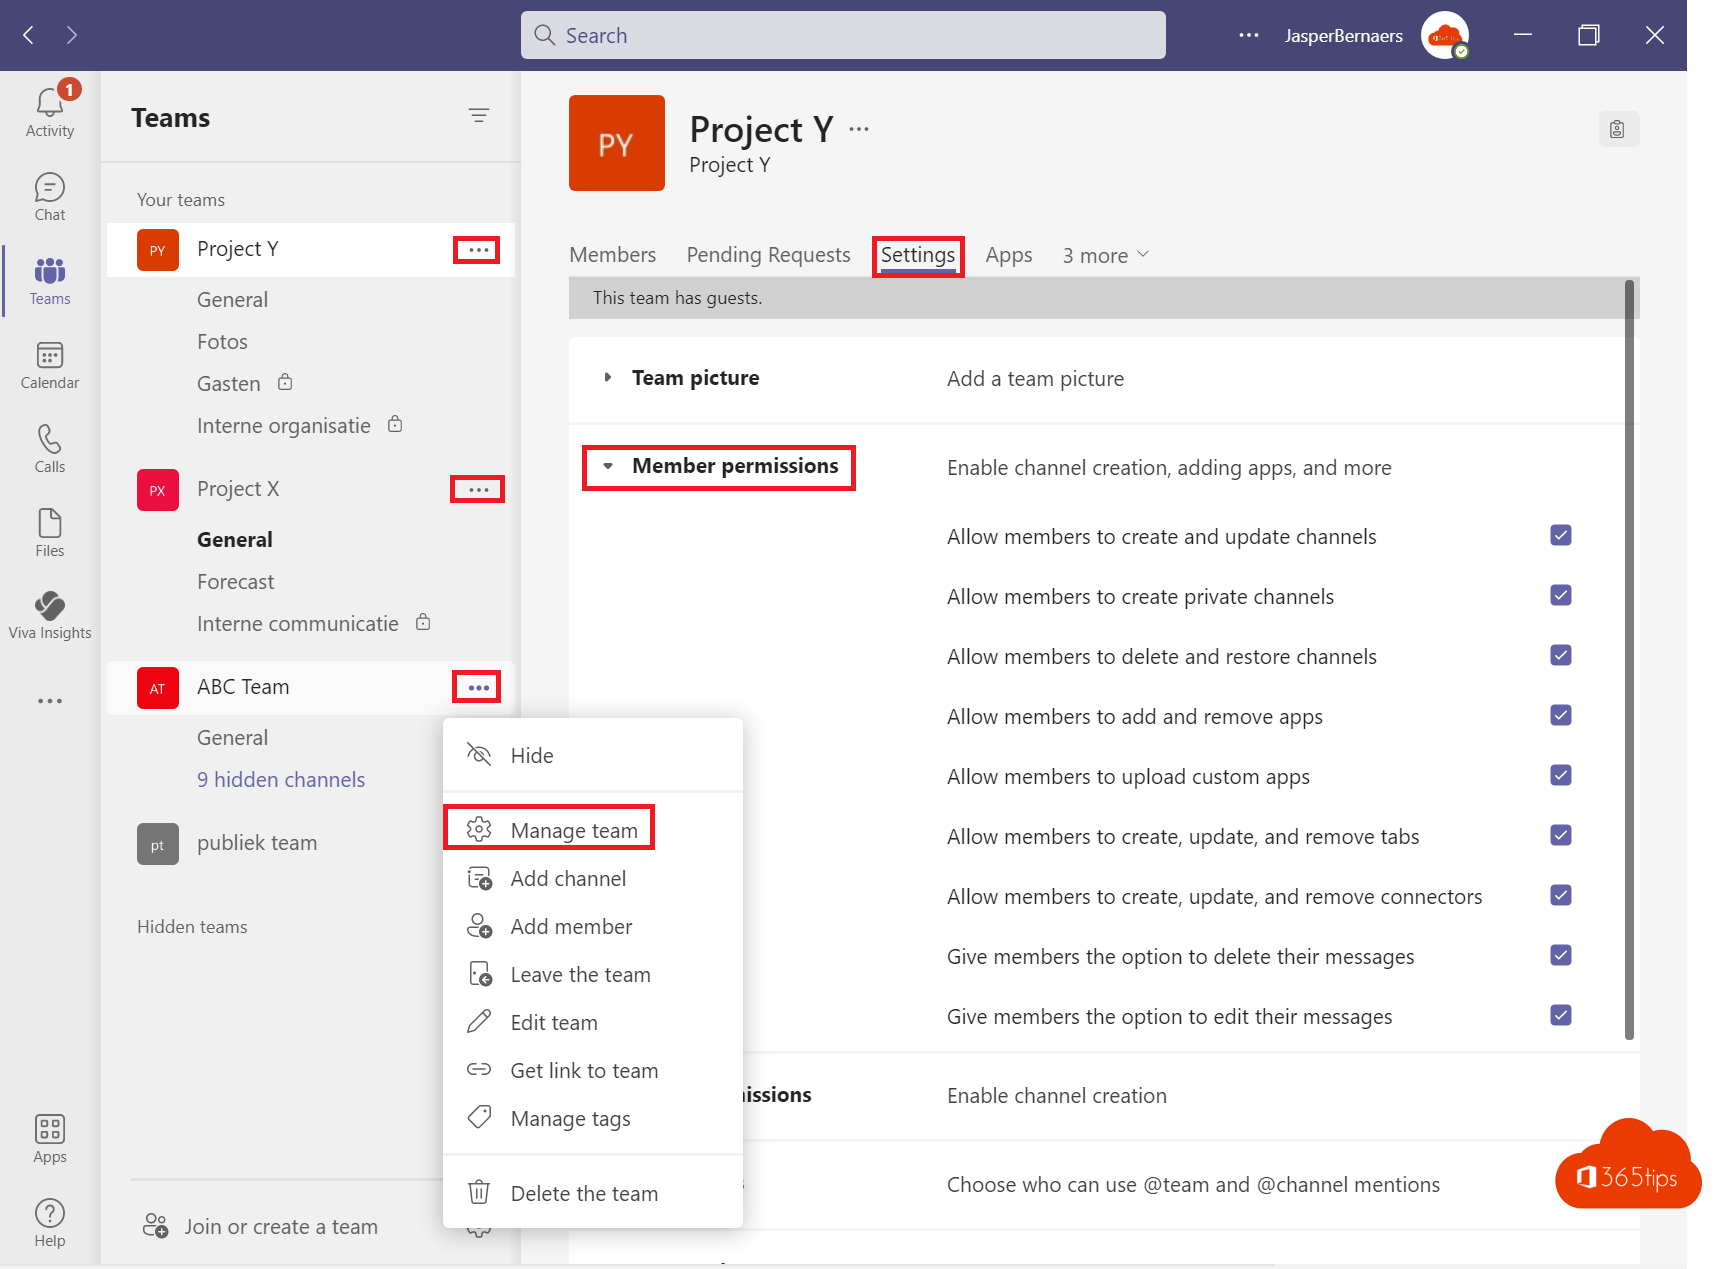 What can team owners, members and guests do in Microsoft Teams?